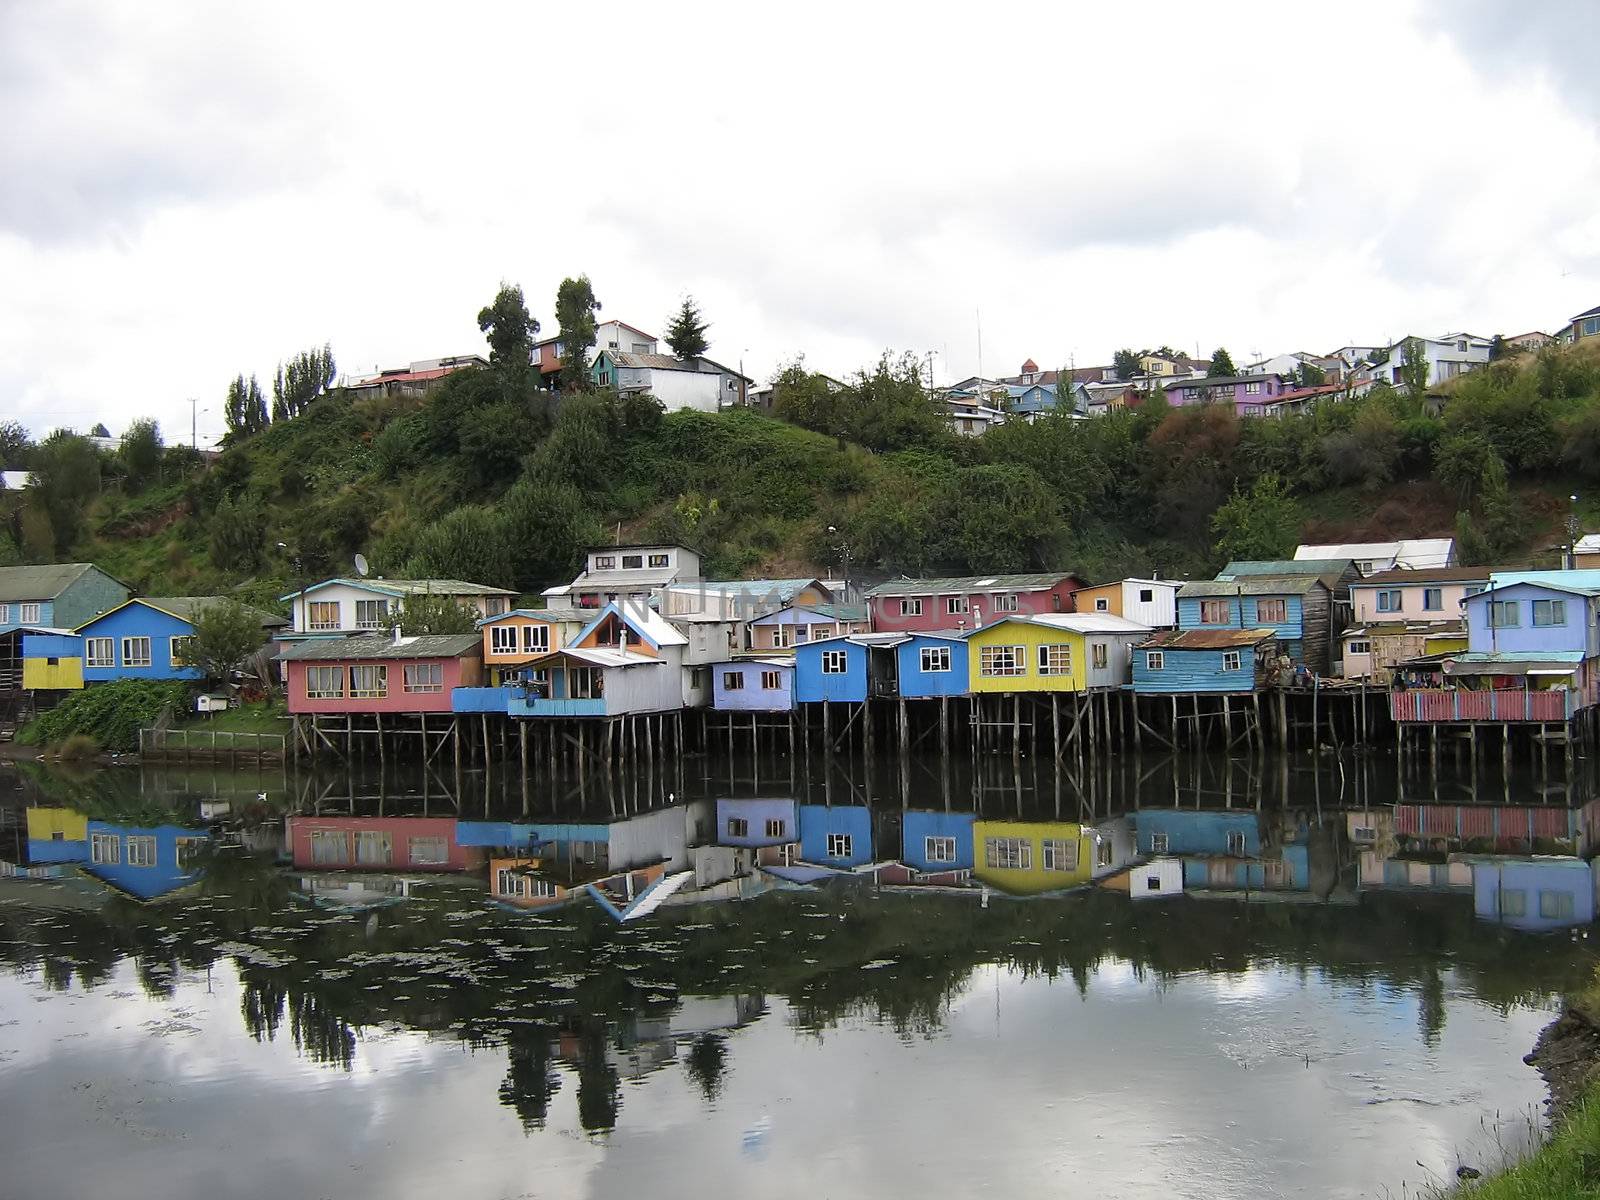 A photograph of a fishing village in South America.